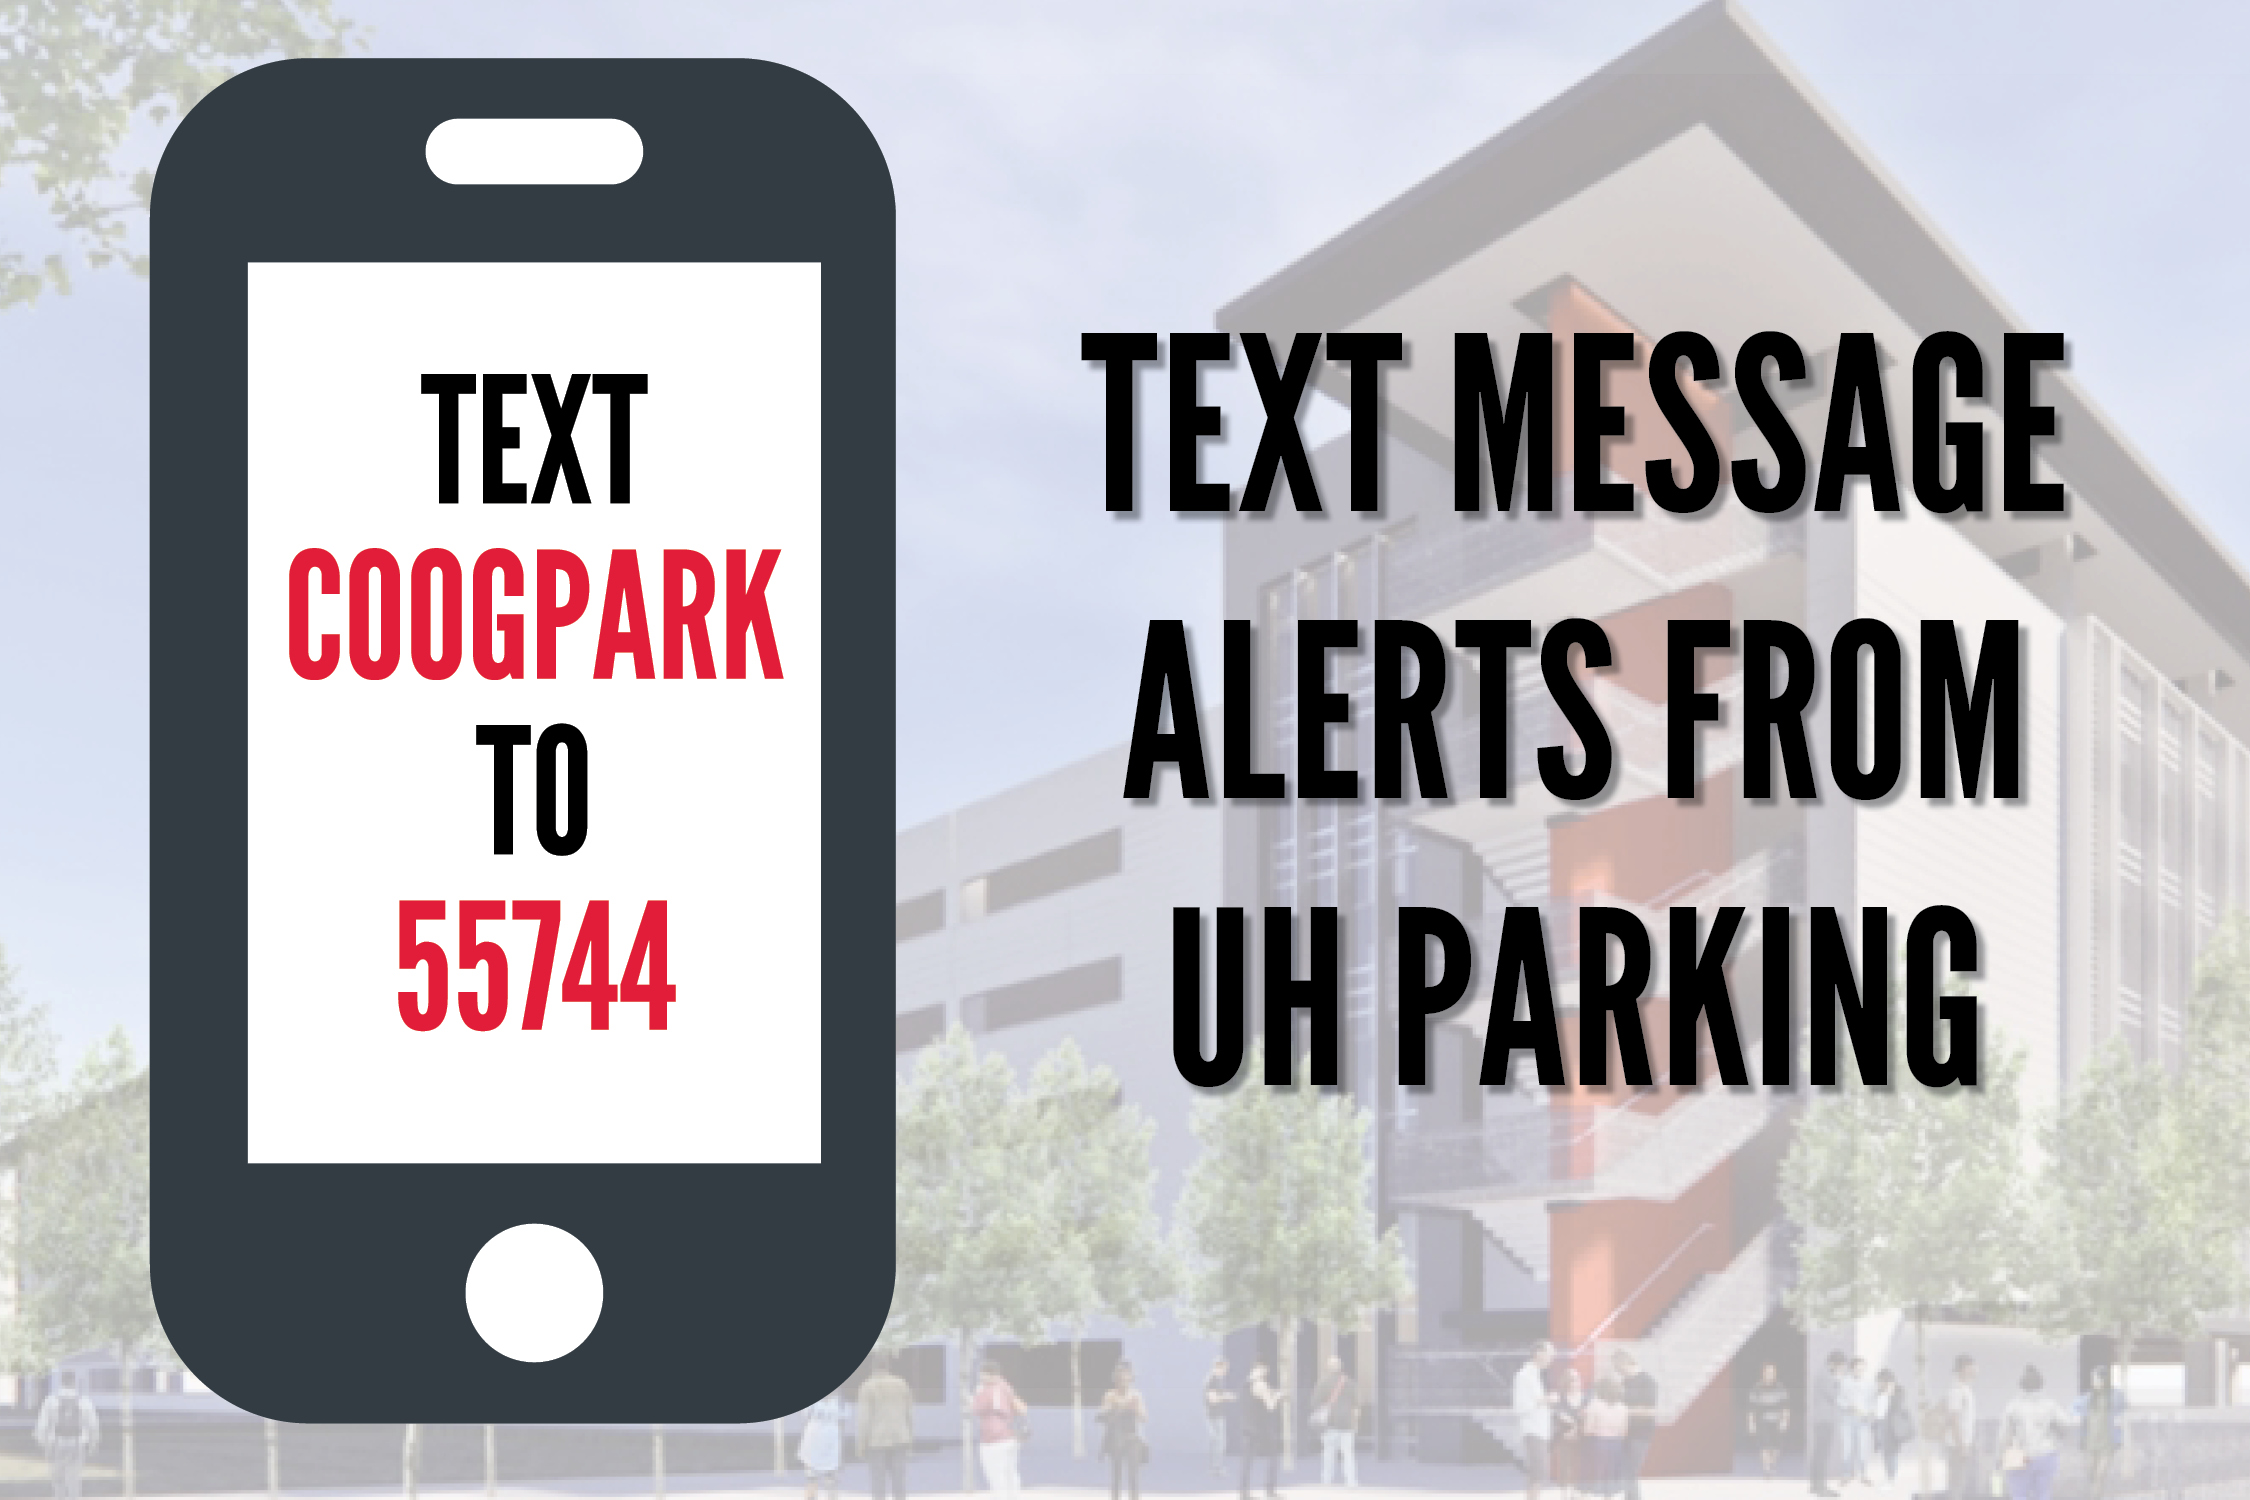 Sign up for text updates from Parking